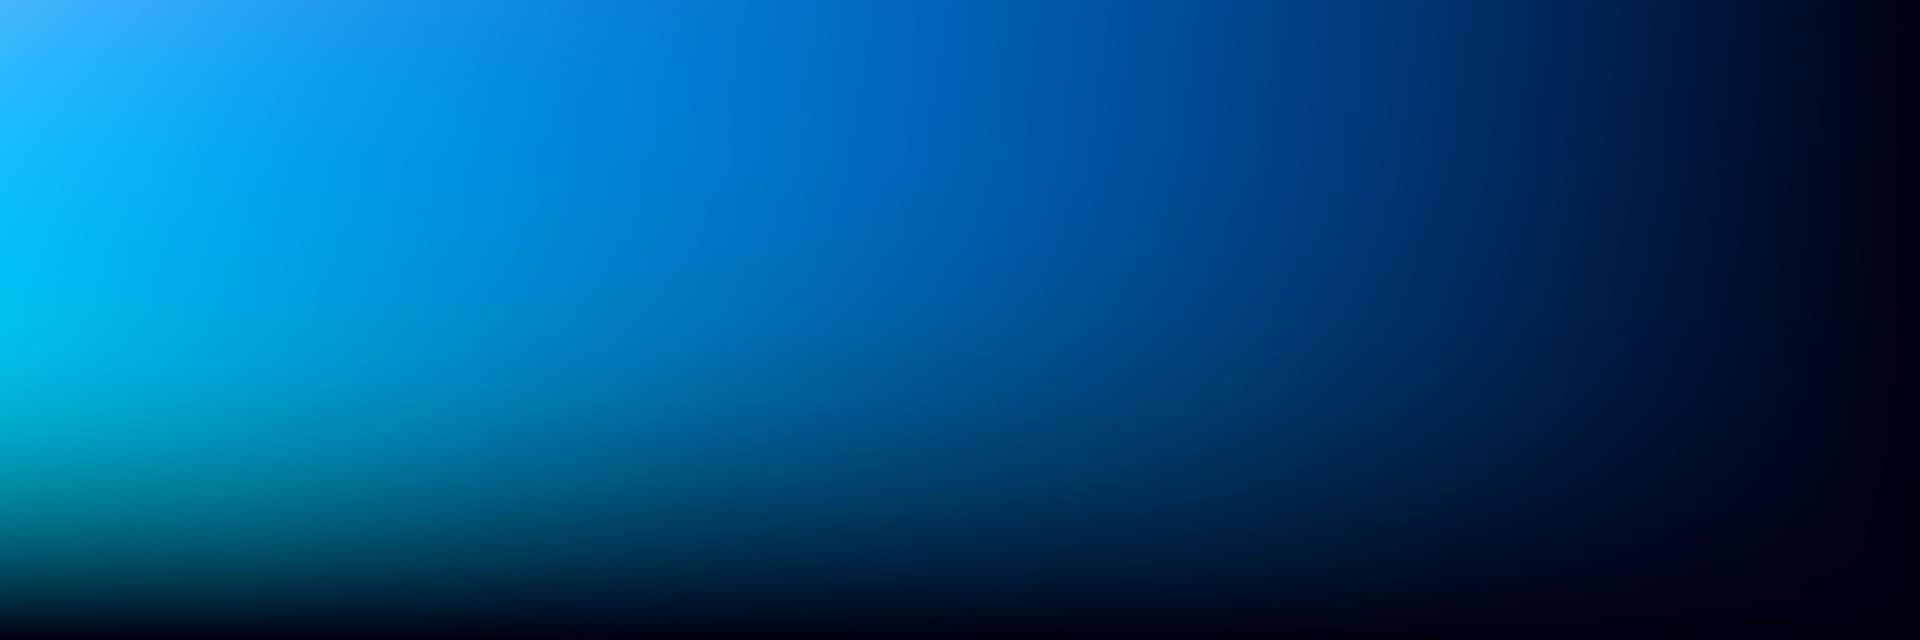 modern panoramic dark blue color gradient background vector